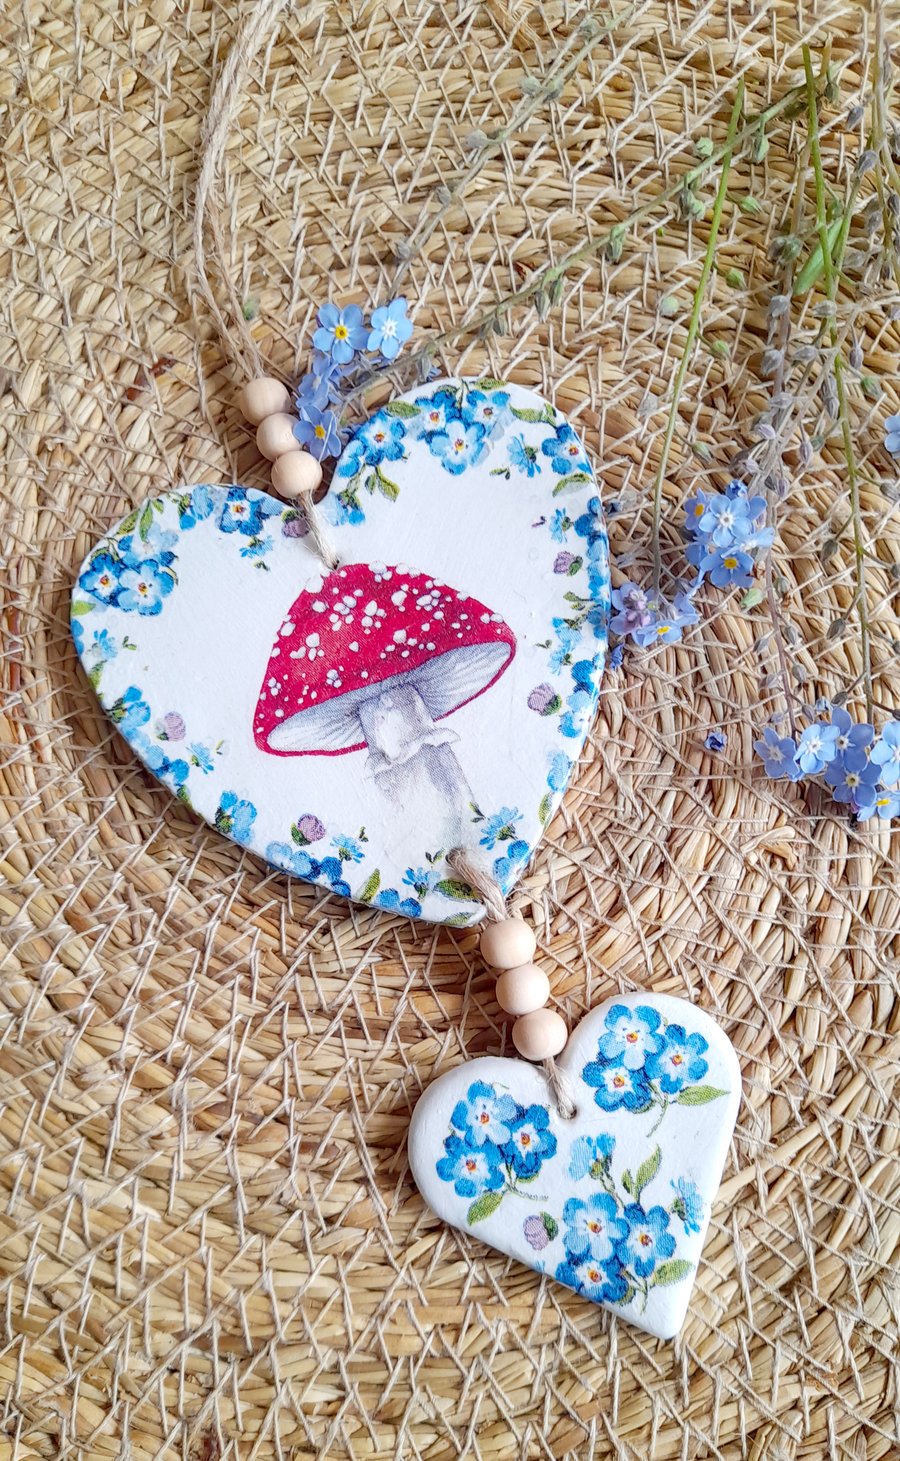 Clay Hanging Hearts FREE POSTAGE 